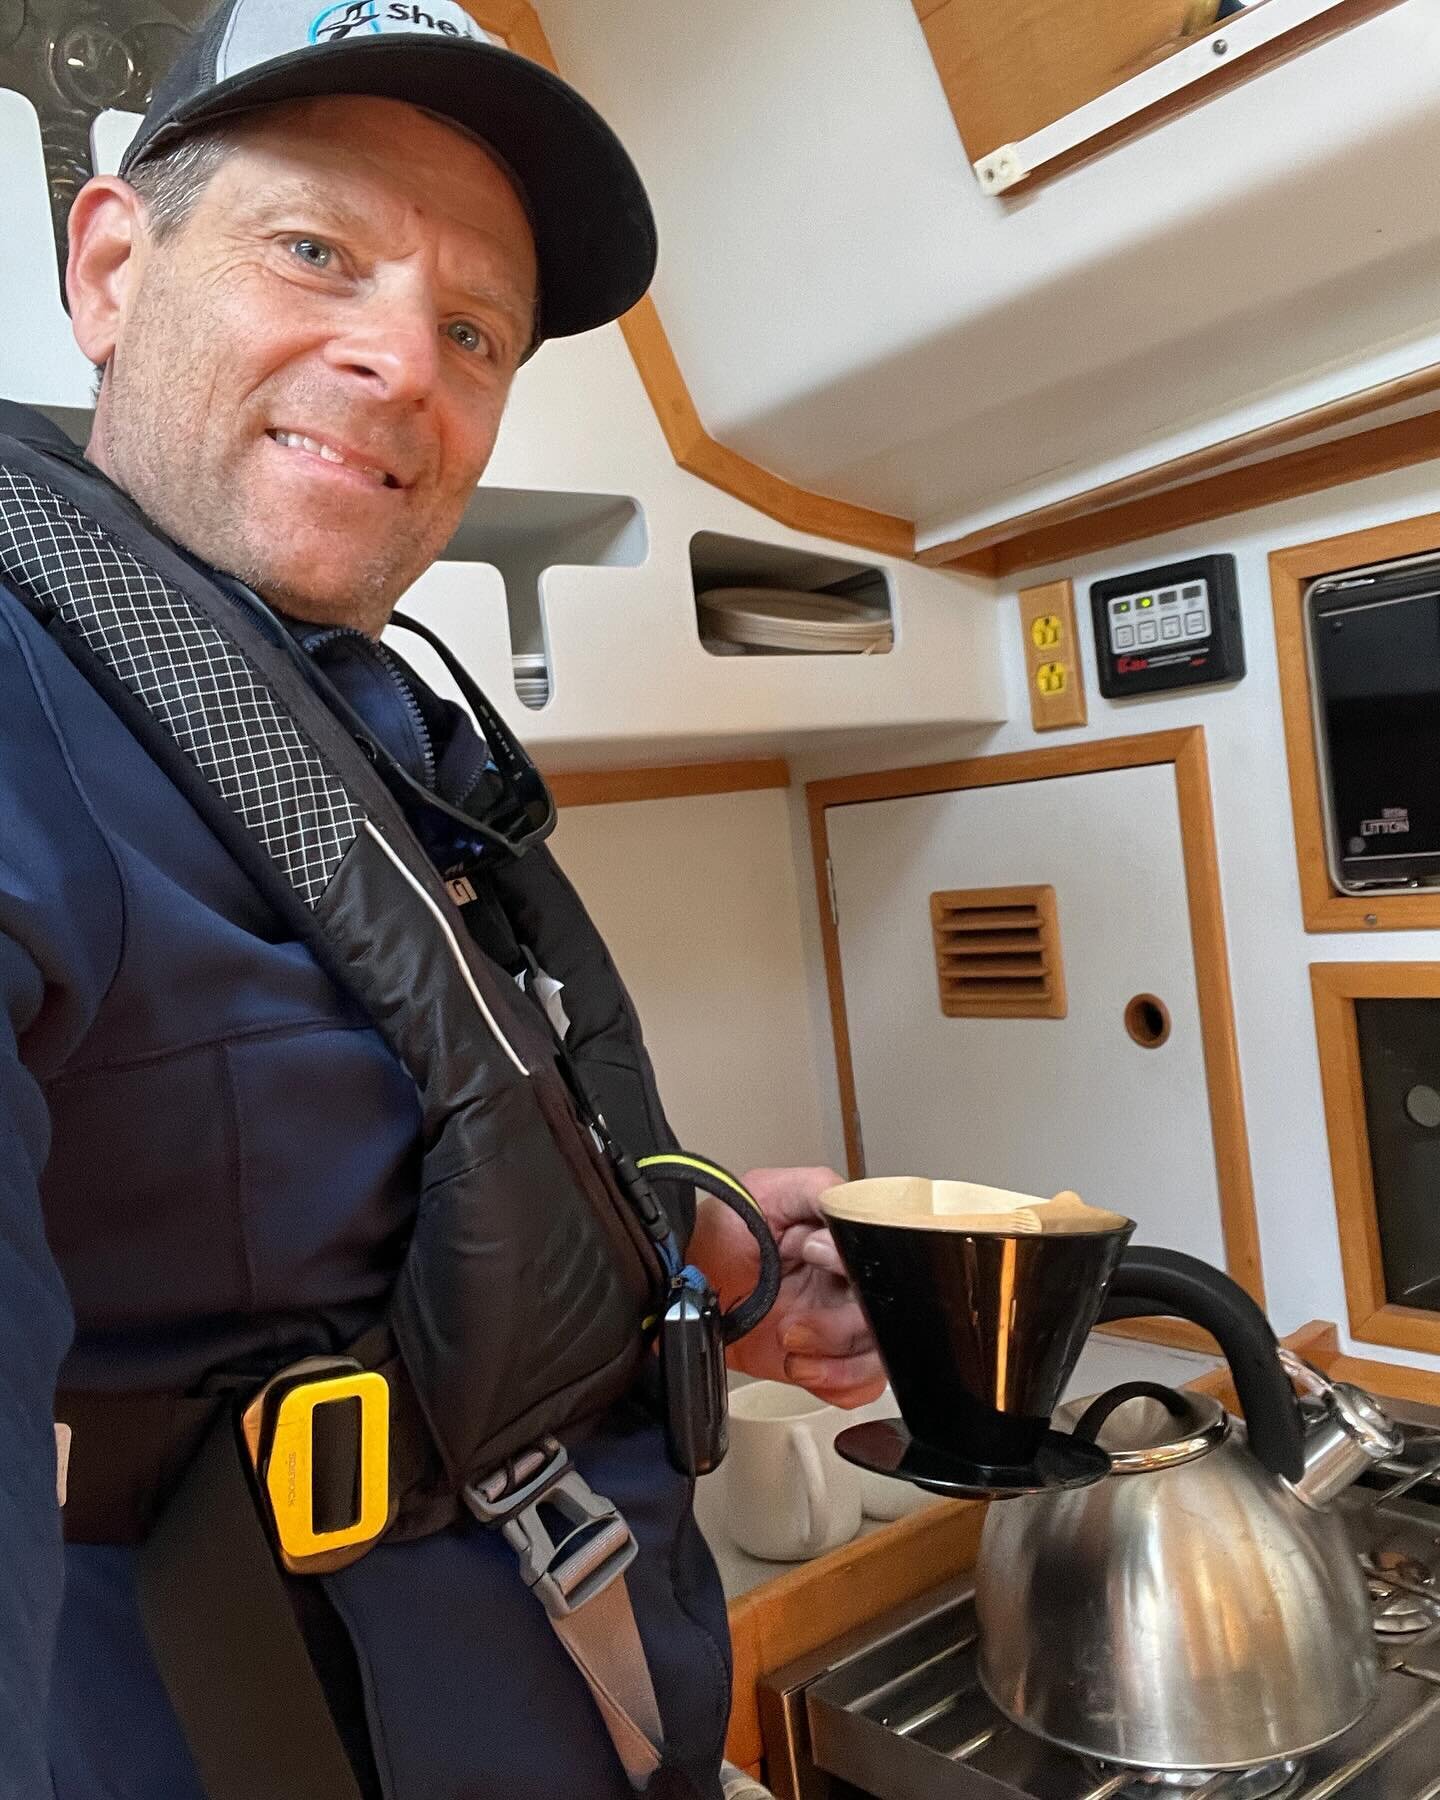 Captain Kevin channeling his inner barista with a delicious hot pourover coffee for his guests today while sailing on Monterey Bay. Come aboard for a tasty cup! ☕️⛵️💦 #sailingcharter 
.
.
.
.
.
.
.
#sailingadventure #atyourservice #innerbarista #sai